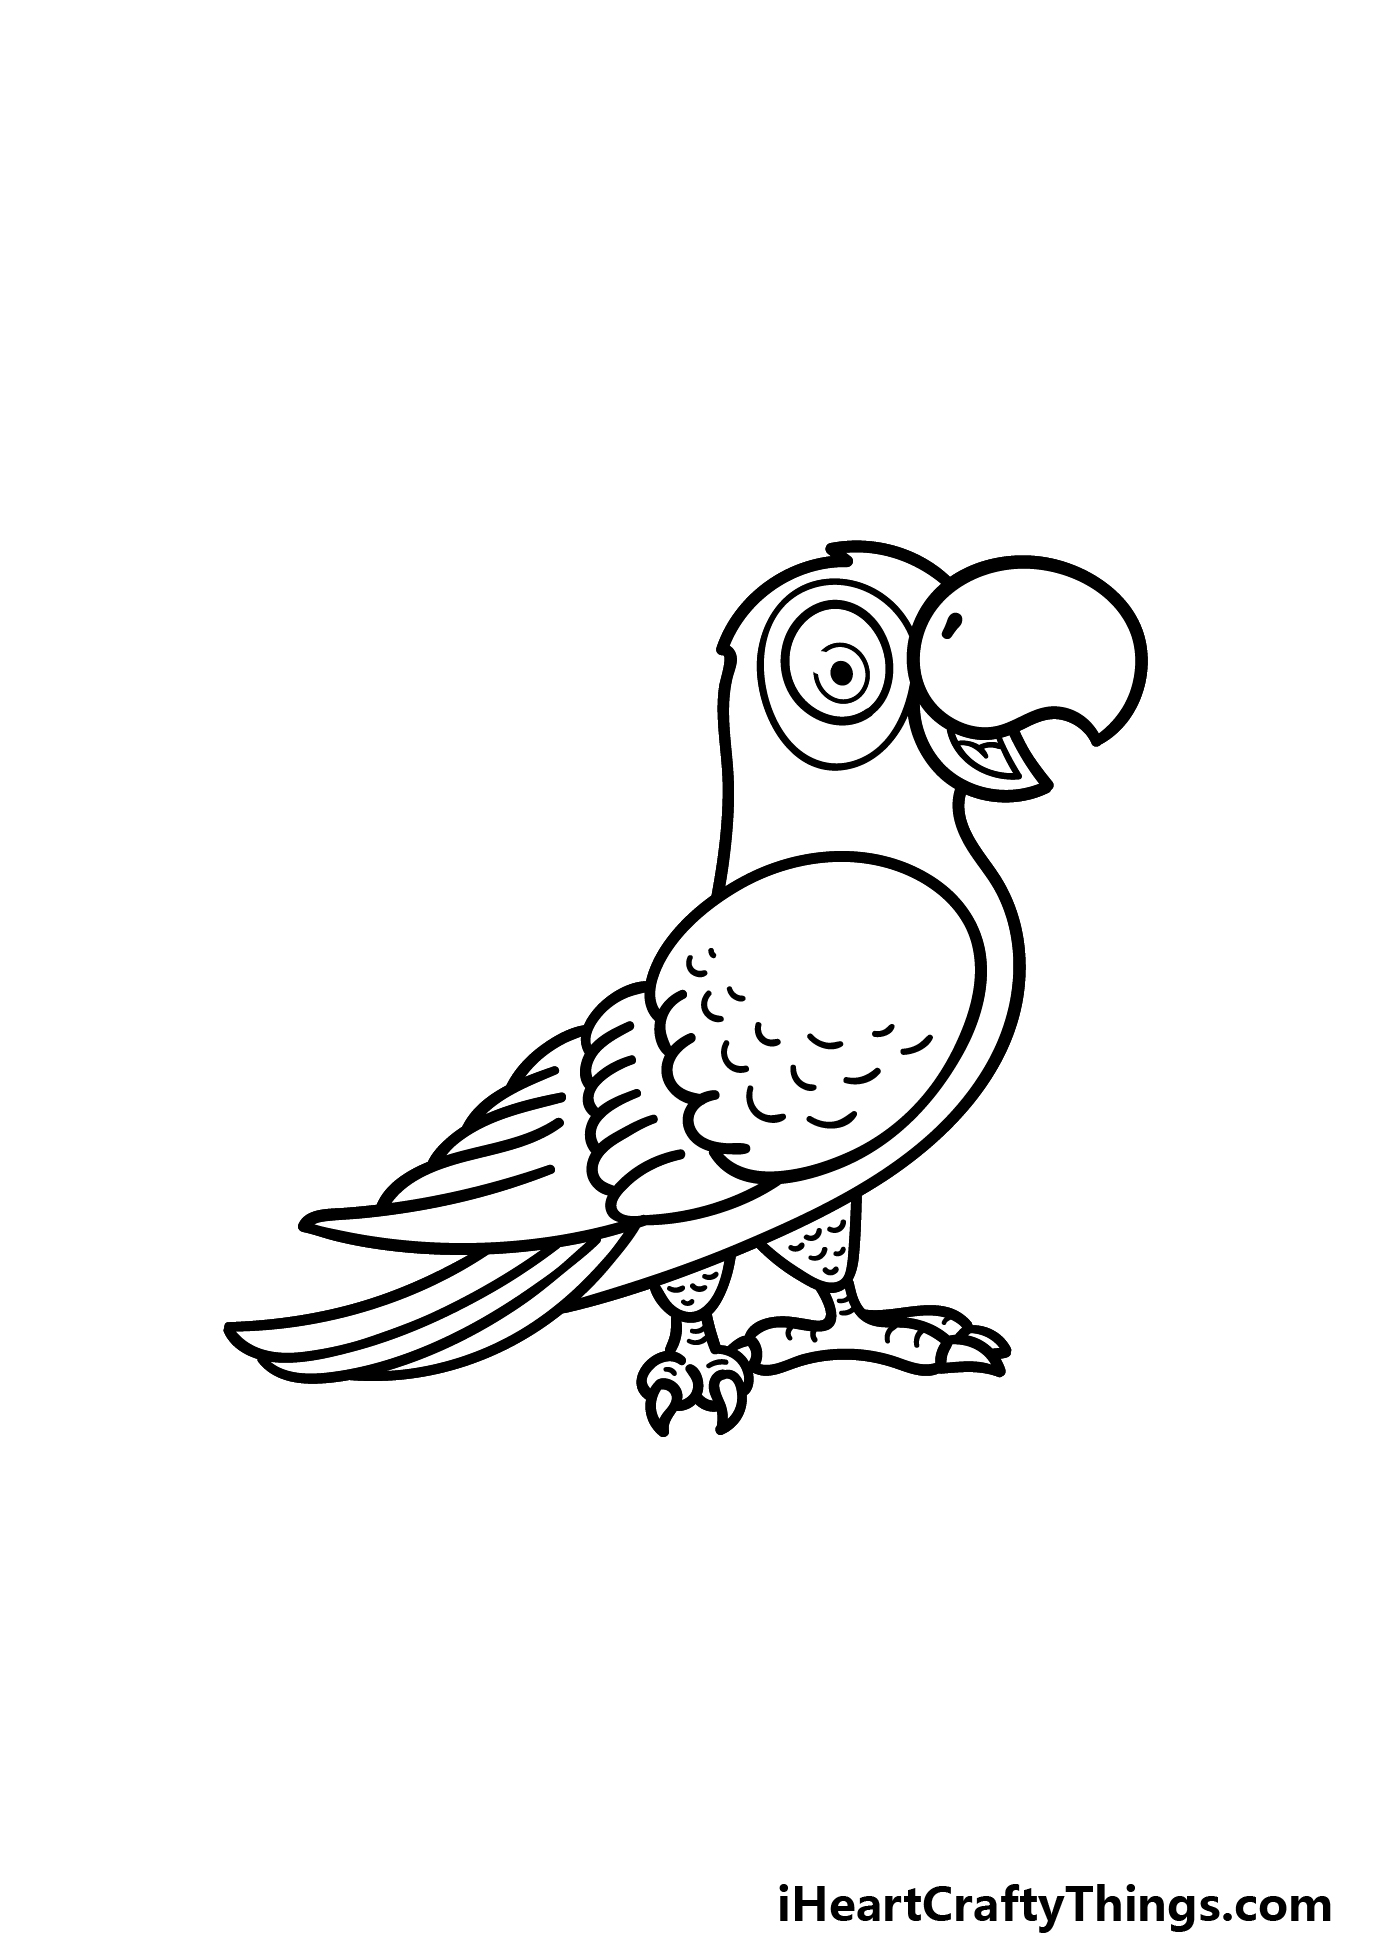 Cartoon Parrot Drawing - How To Draw A Cartoon Parrot Step By Step